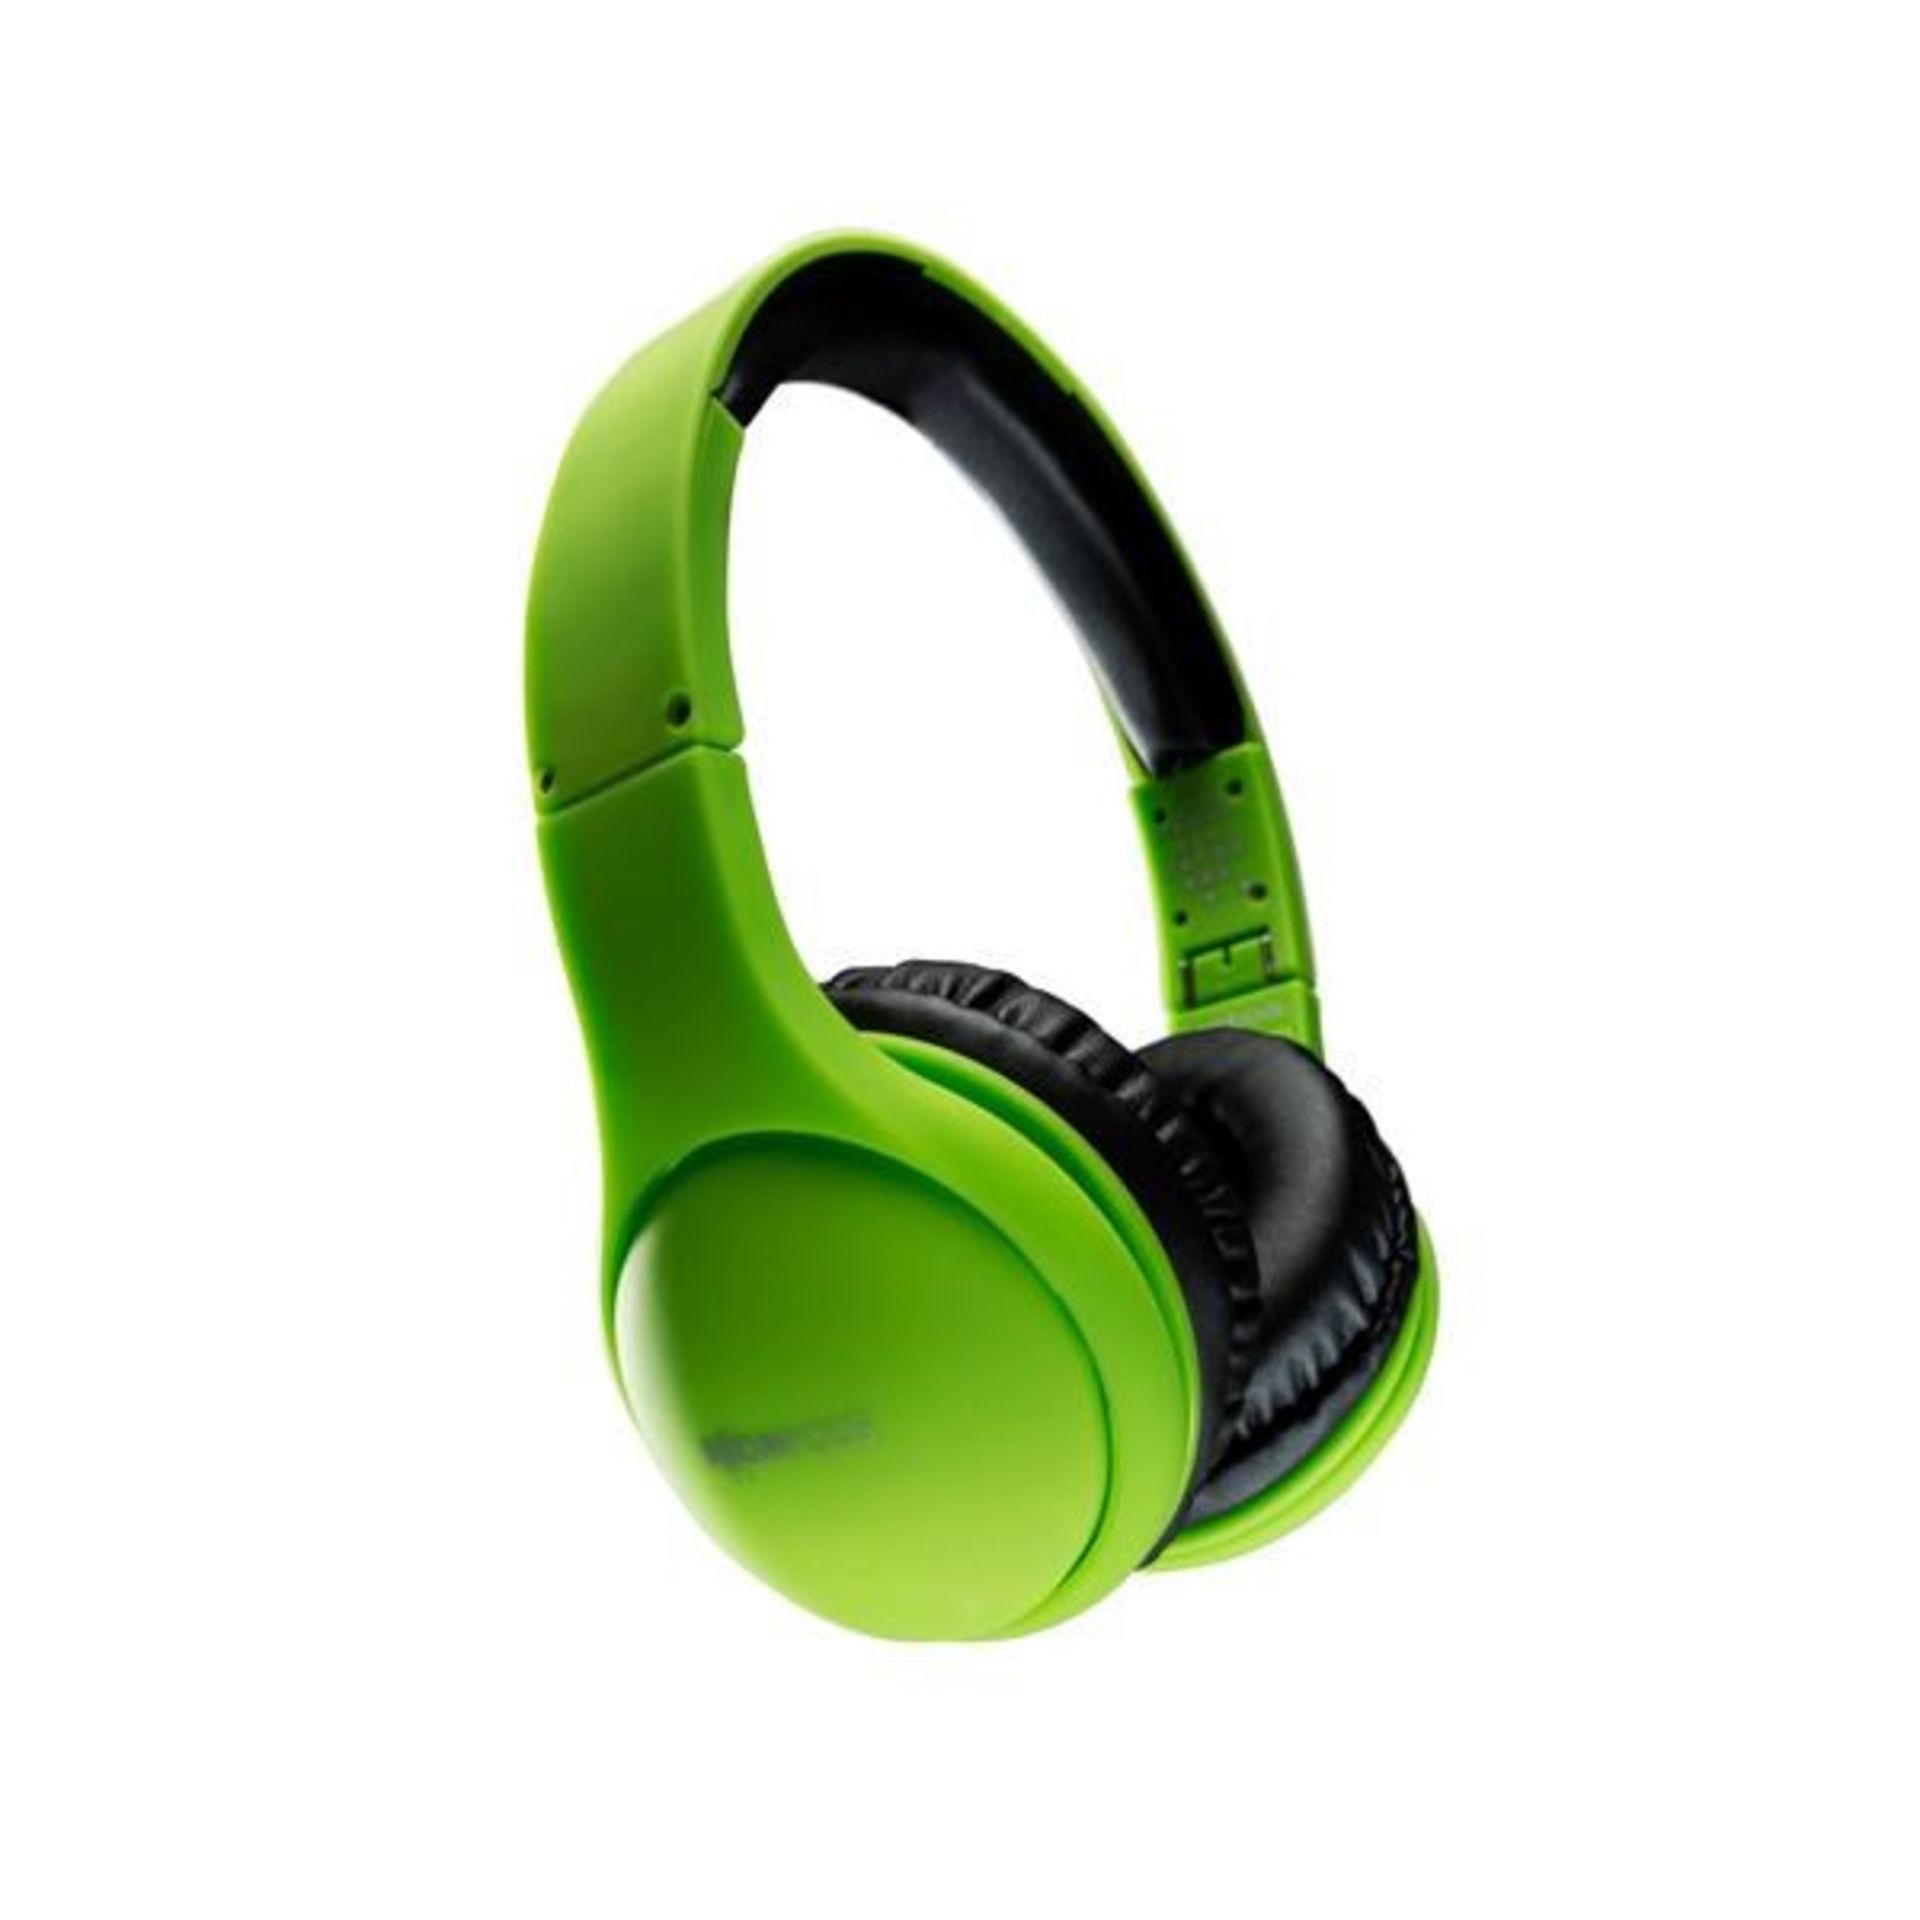 V *TRADE QTY* Brand New Boompods Headpods Foldable Soft Touch Headphones In Green Includes IPhone - Image 2 of 2